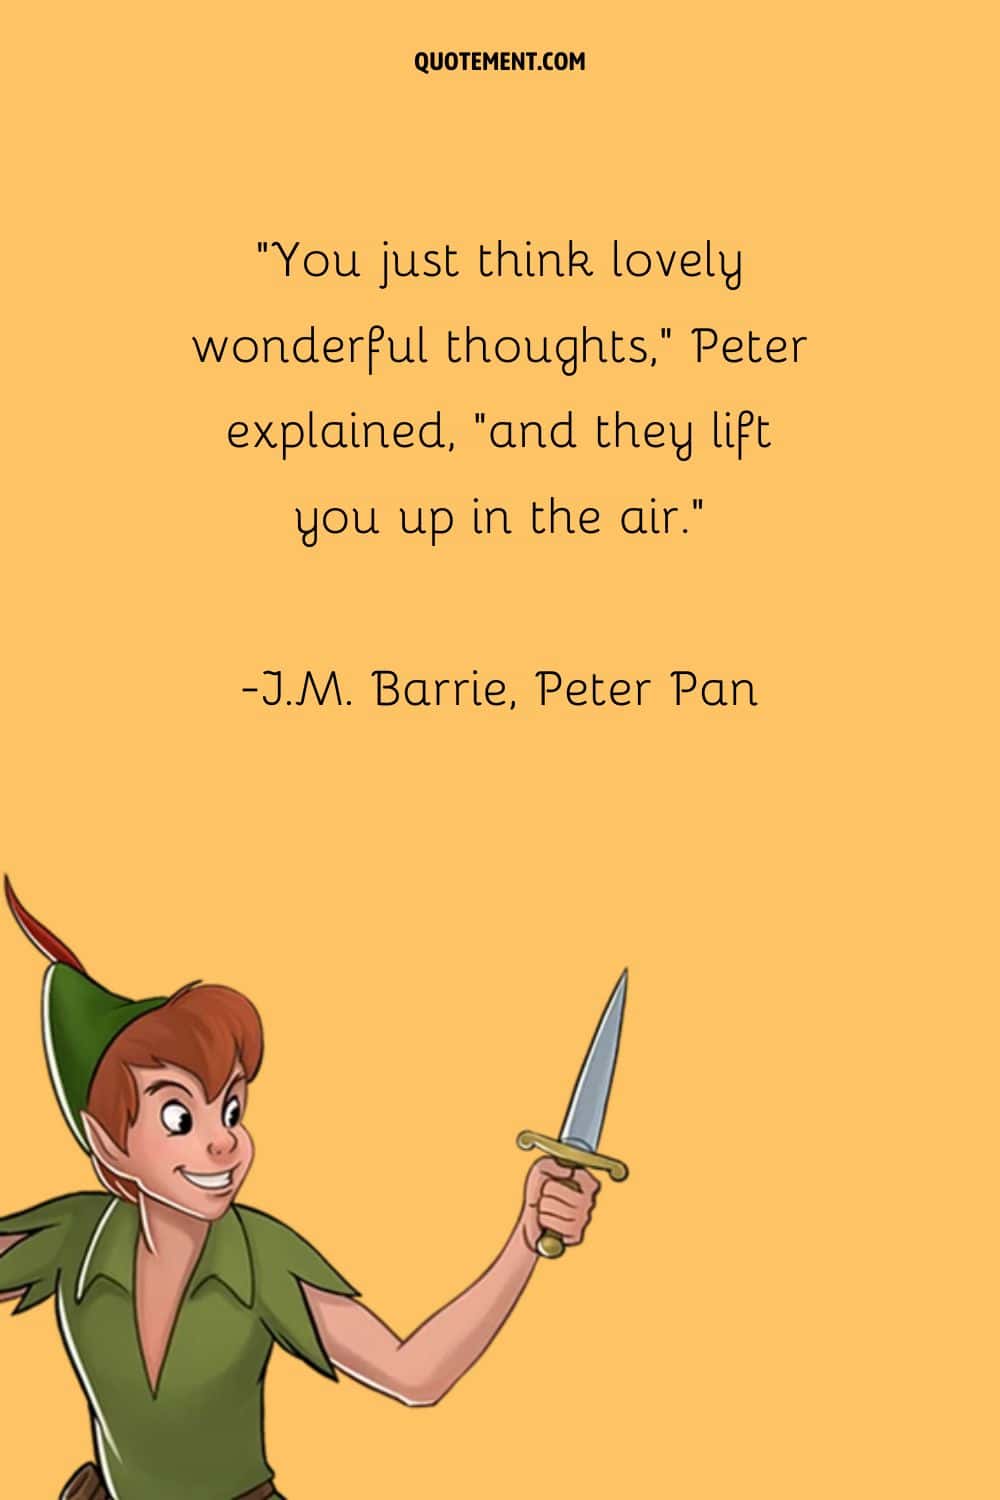 “You just think lovely wonderful thoughts, Peter explained, and they lift you up in the air.” ― J.M. Barrie, Peter Pan